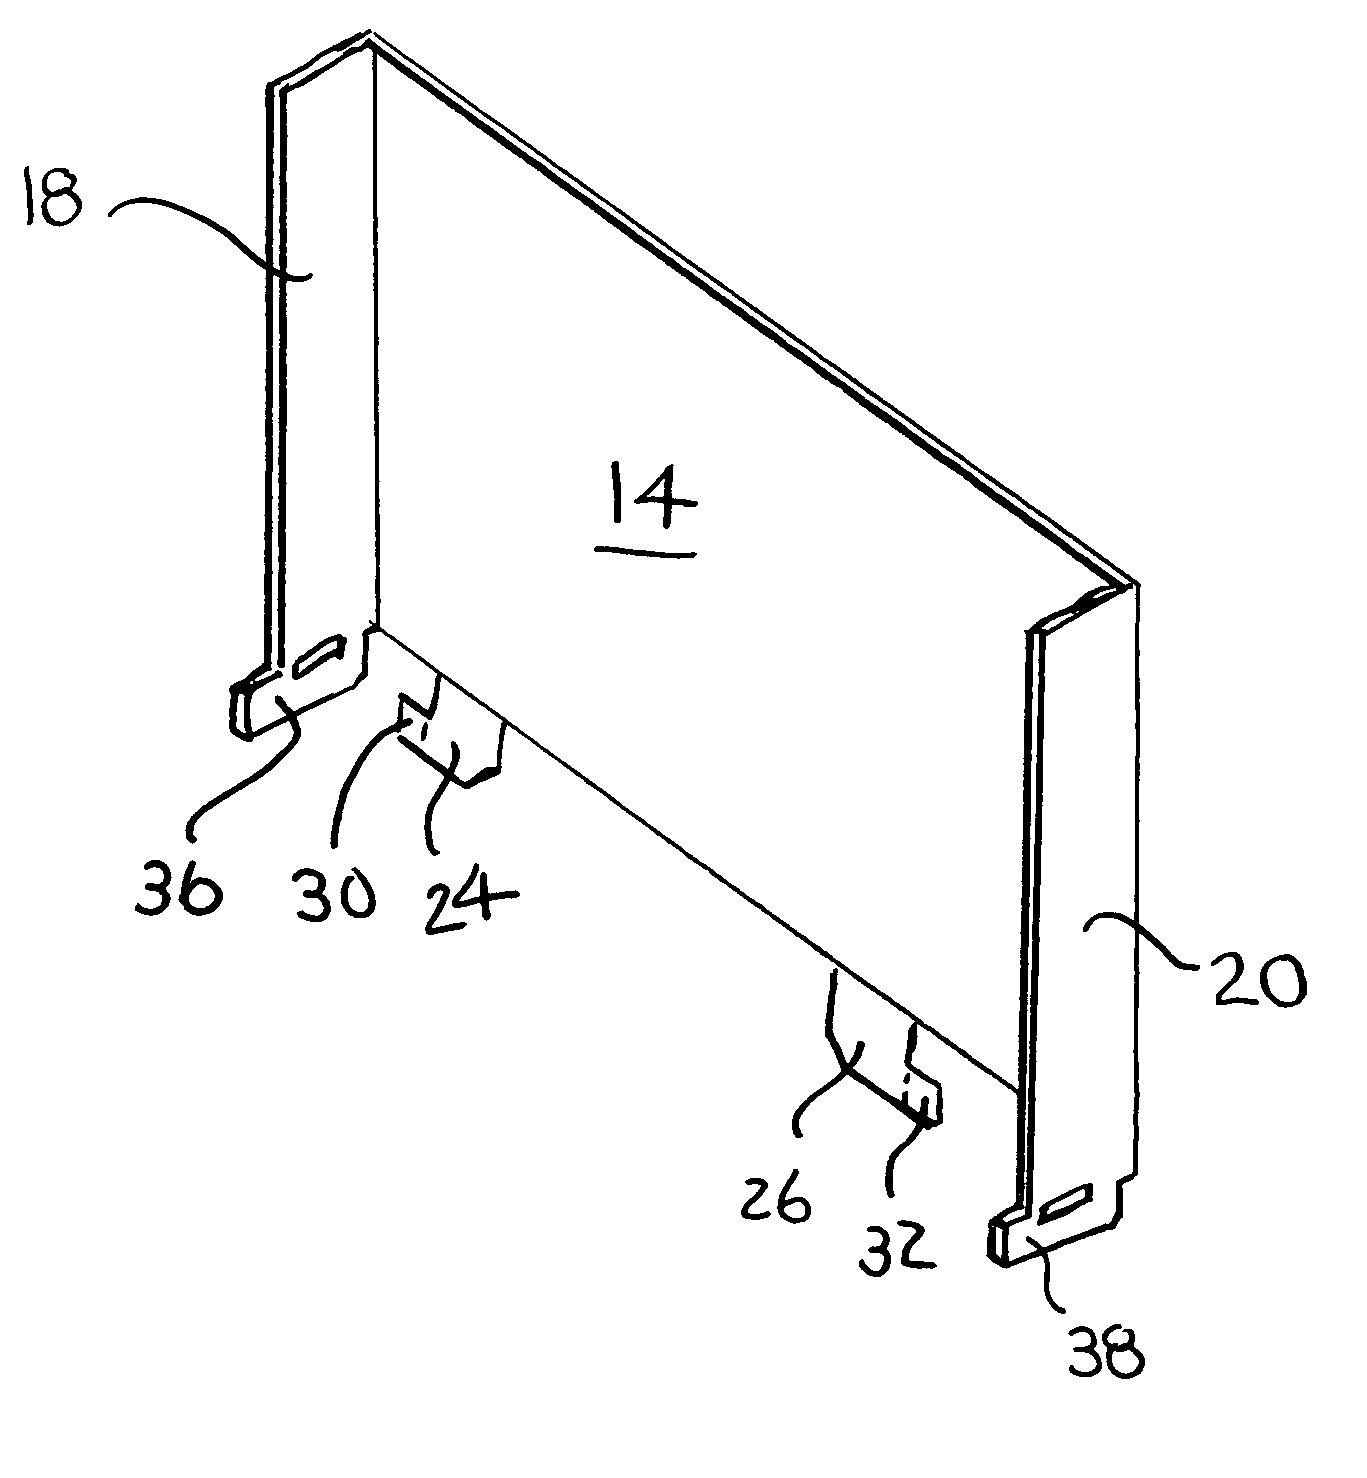 Flip-up headers for point-of-purchase displays